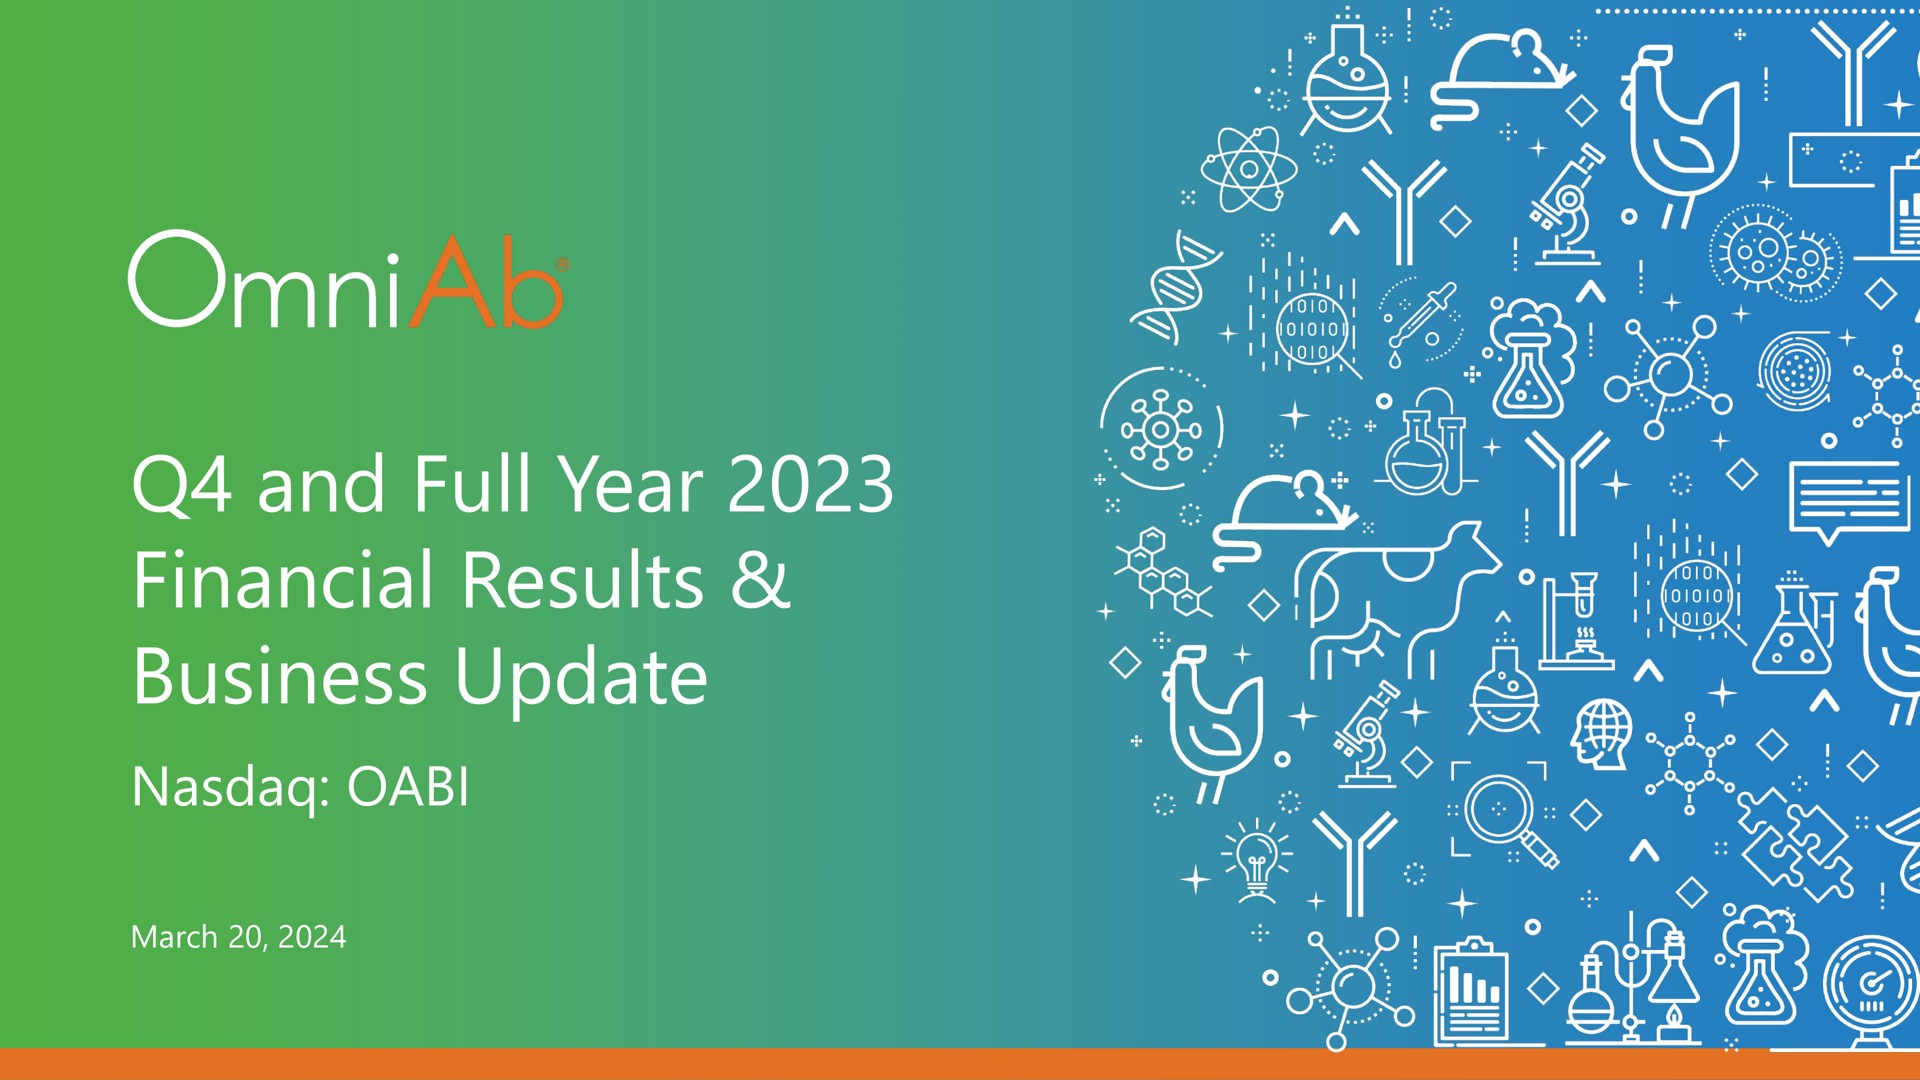 and full year financial results business update | OmniAb